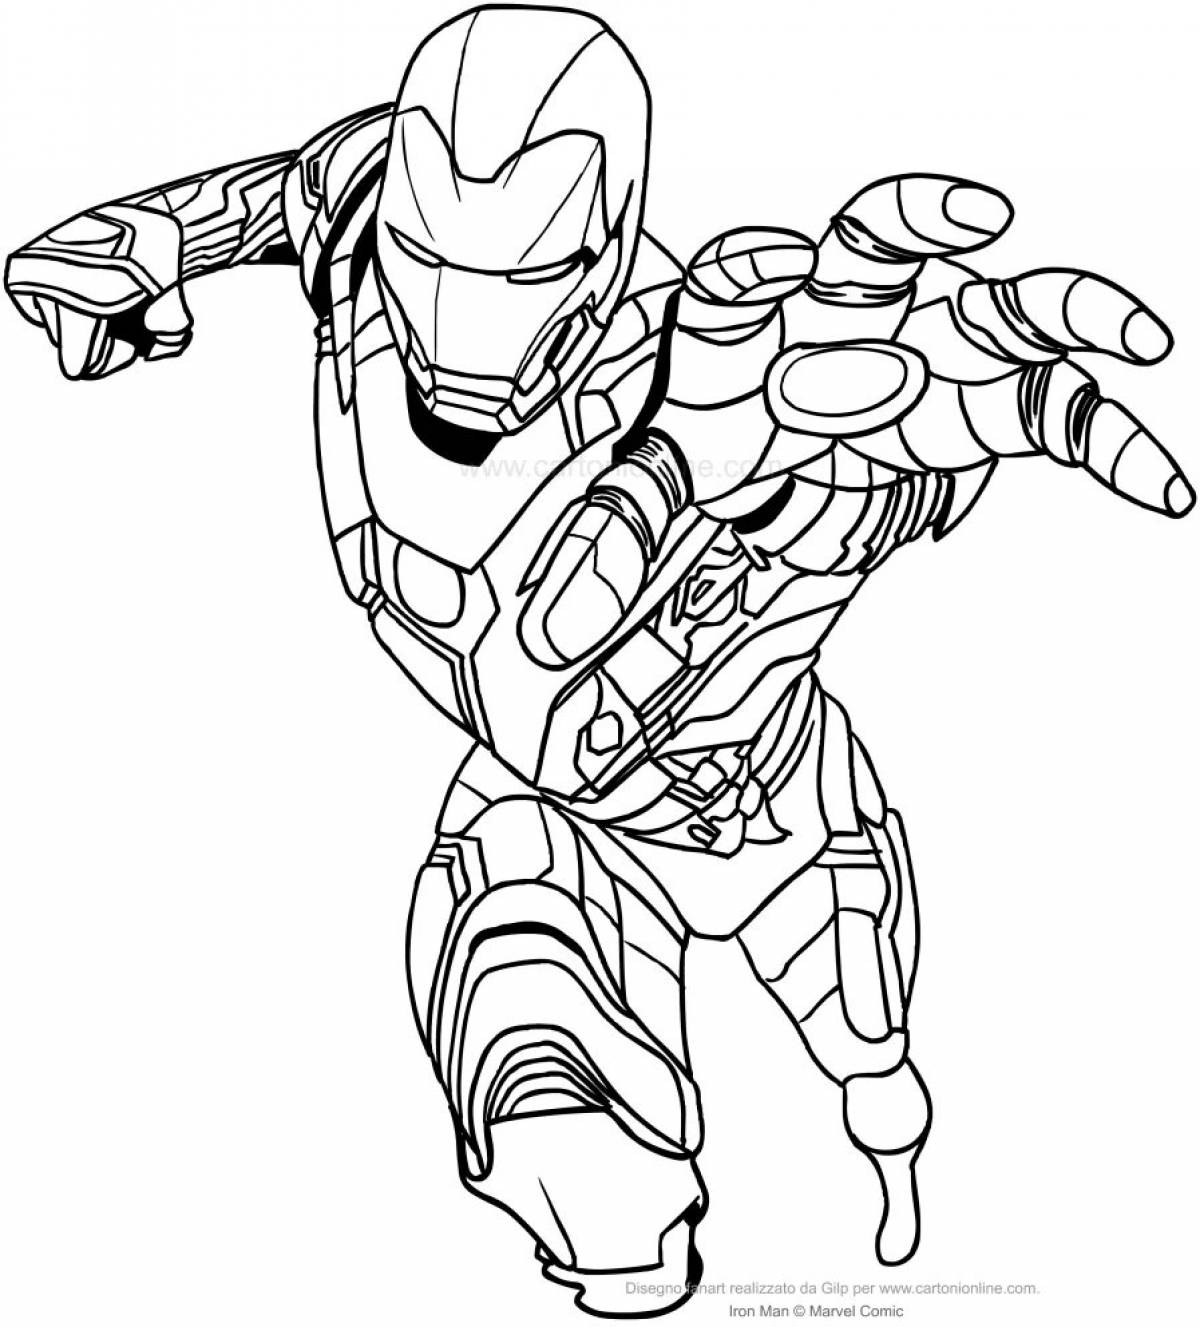 Charming marvel iron man coloring page